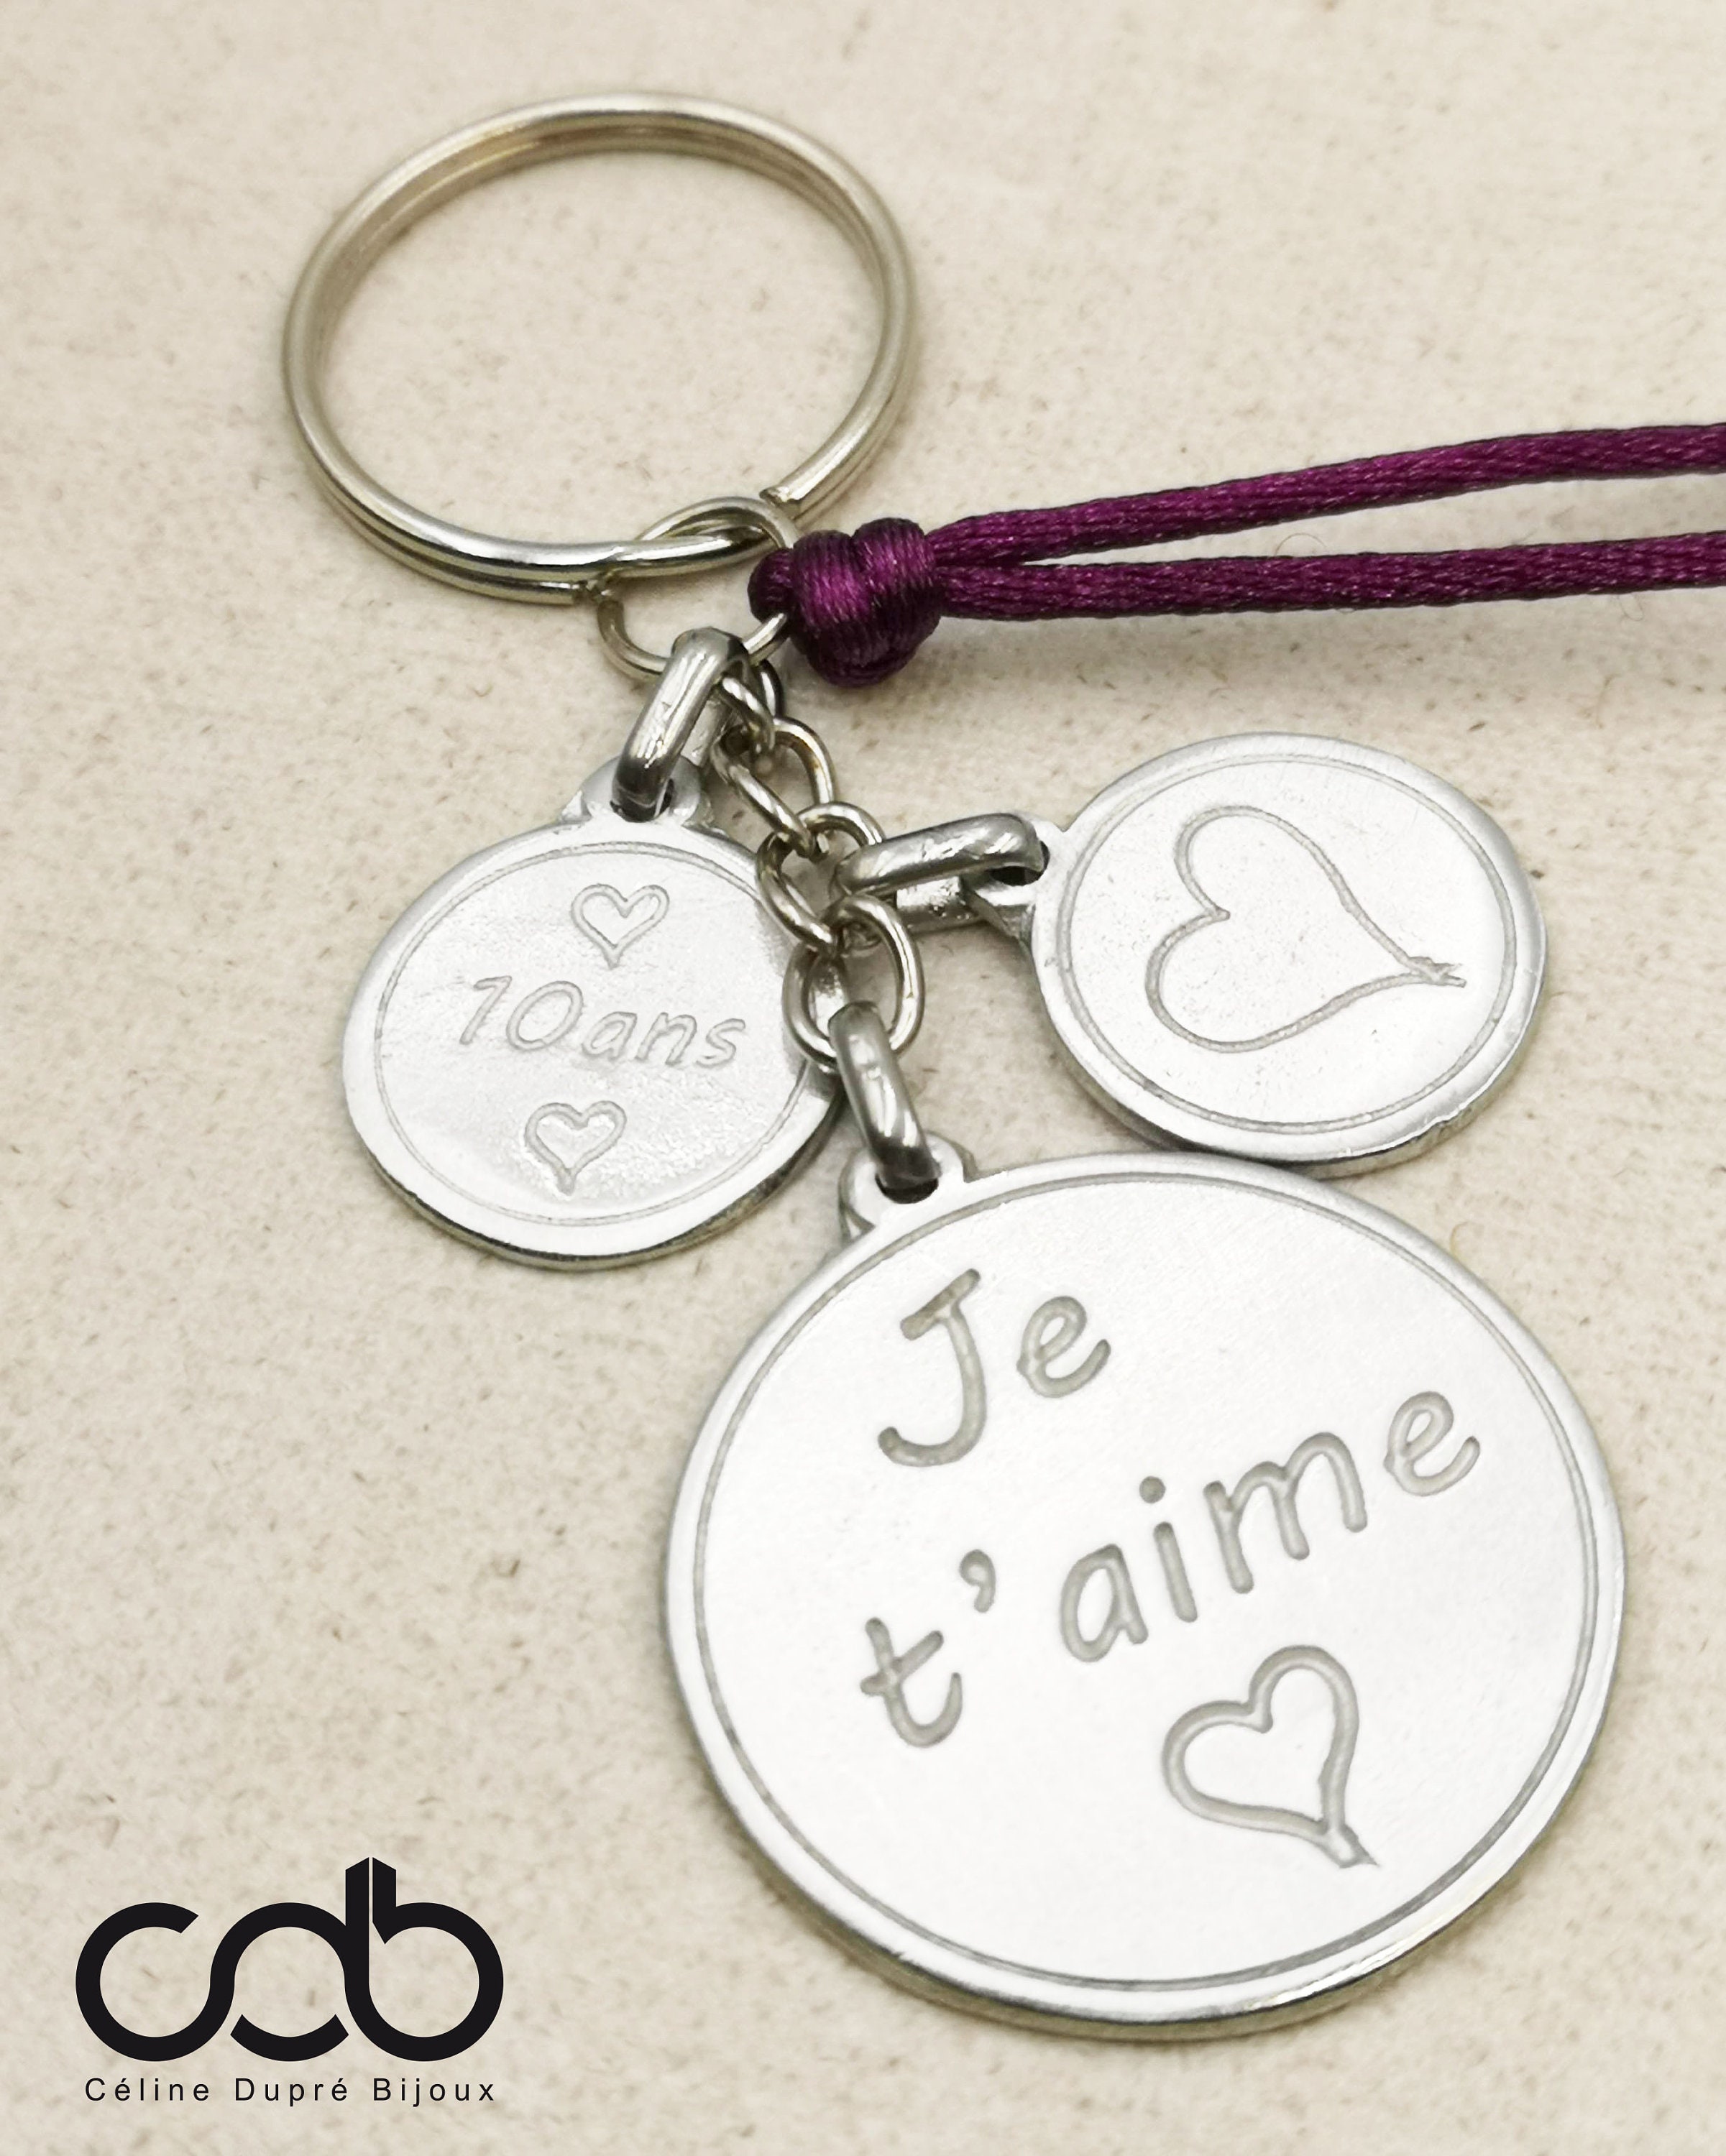 Limited Edition Love /'17mm/' Key door for your tin wedding 20112021 with 3 medals: text /'30 heart /'17mm